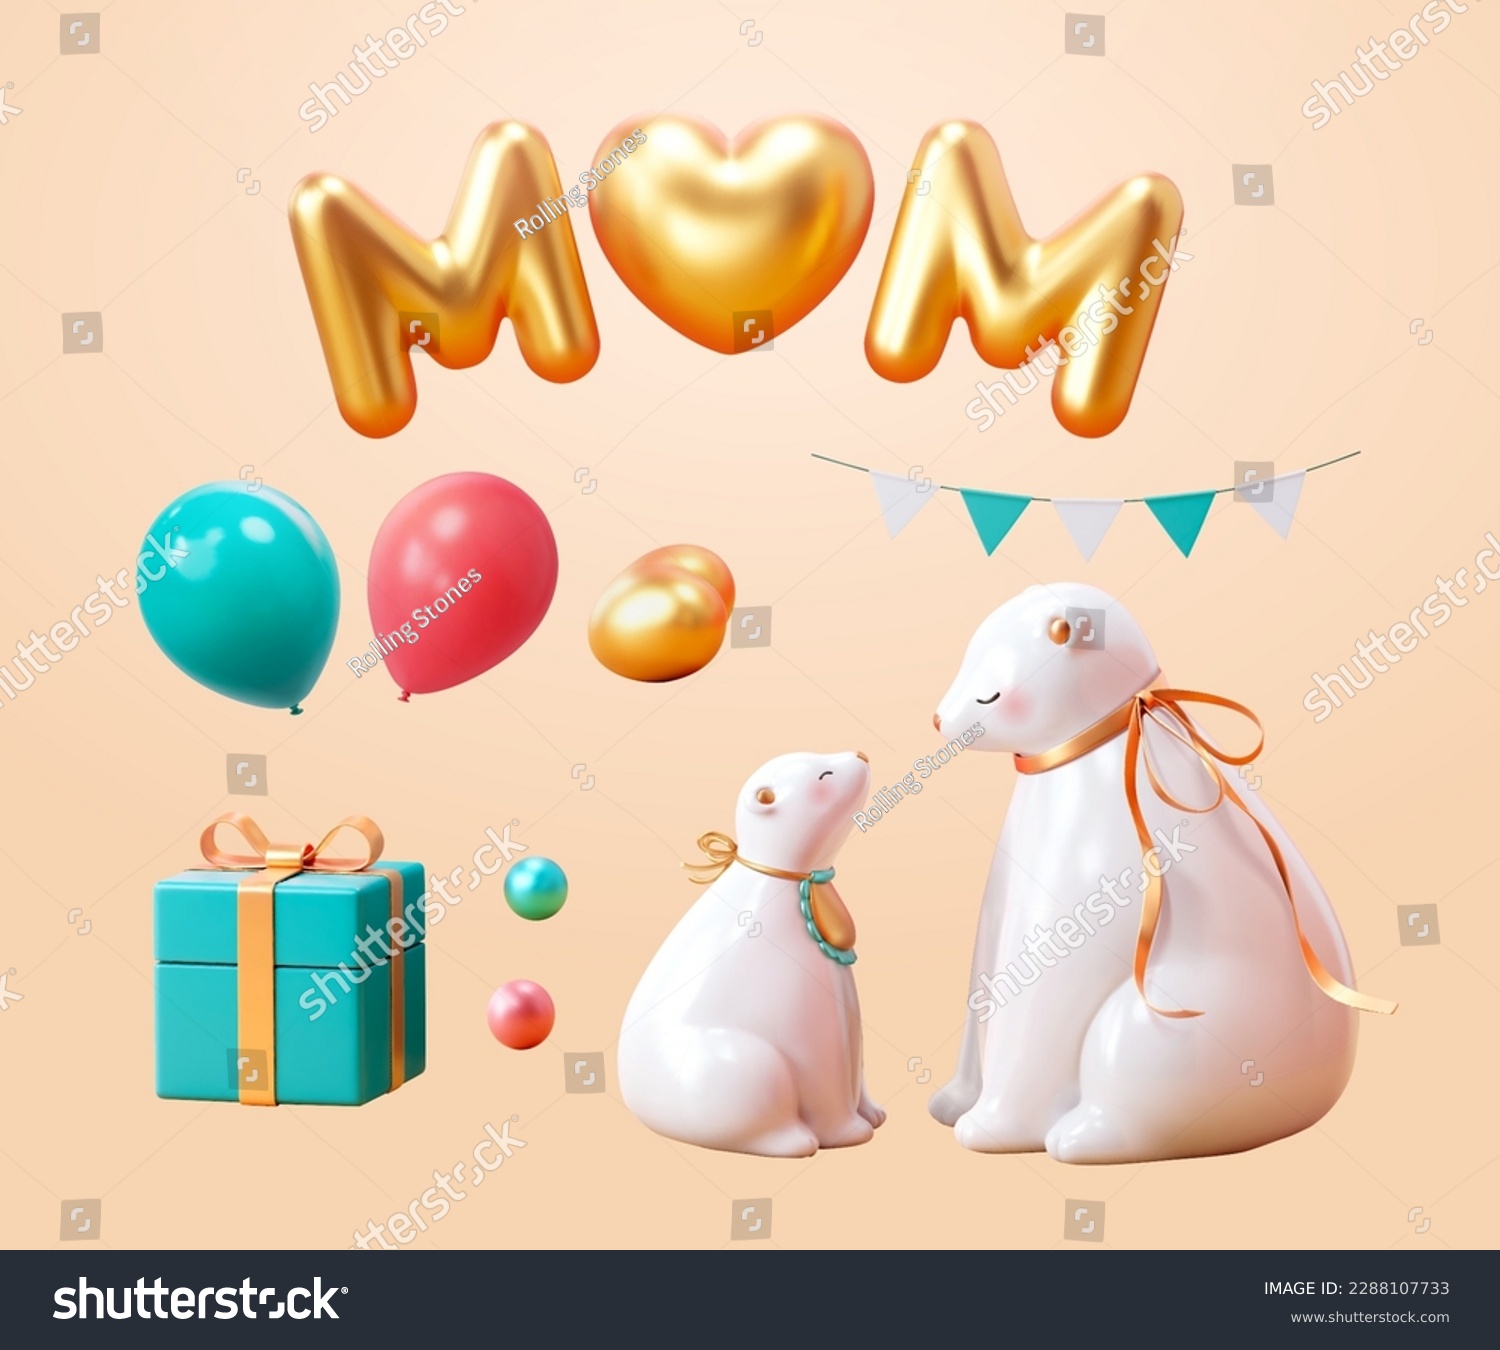 SVG of 3D party decoration element set isolated on light beige background. Including balloons, gift box, garland, sphere decorations, and porcelain polar bears. Suitable for mother's day. svg